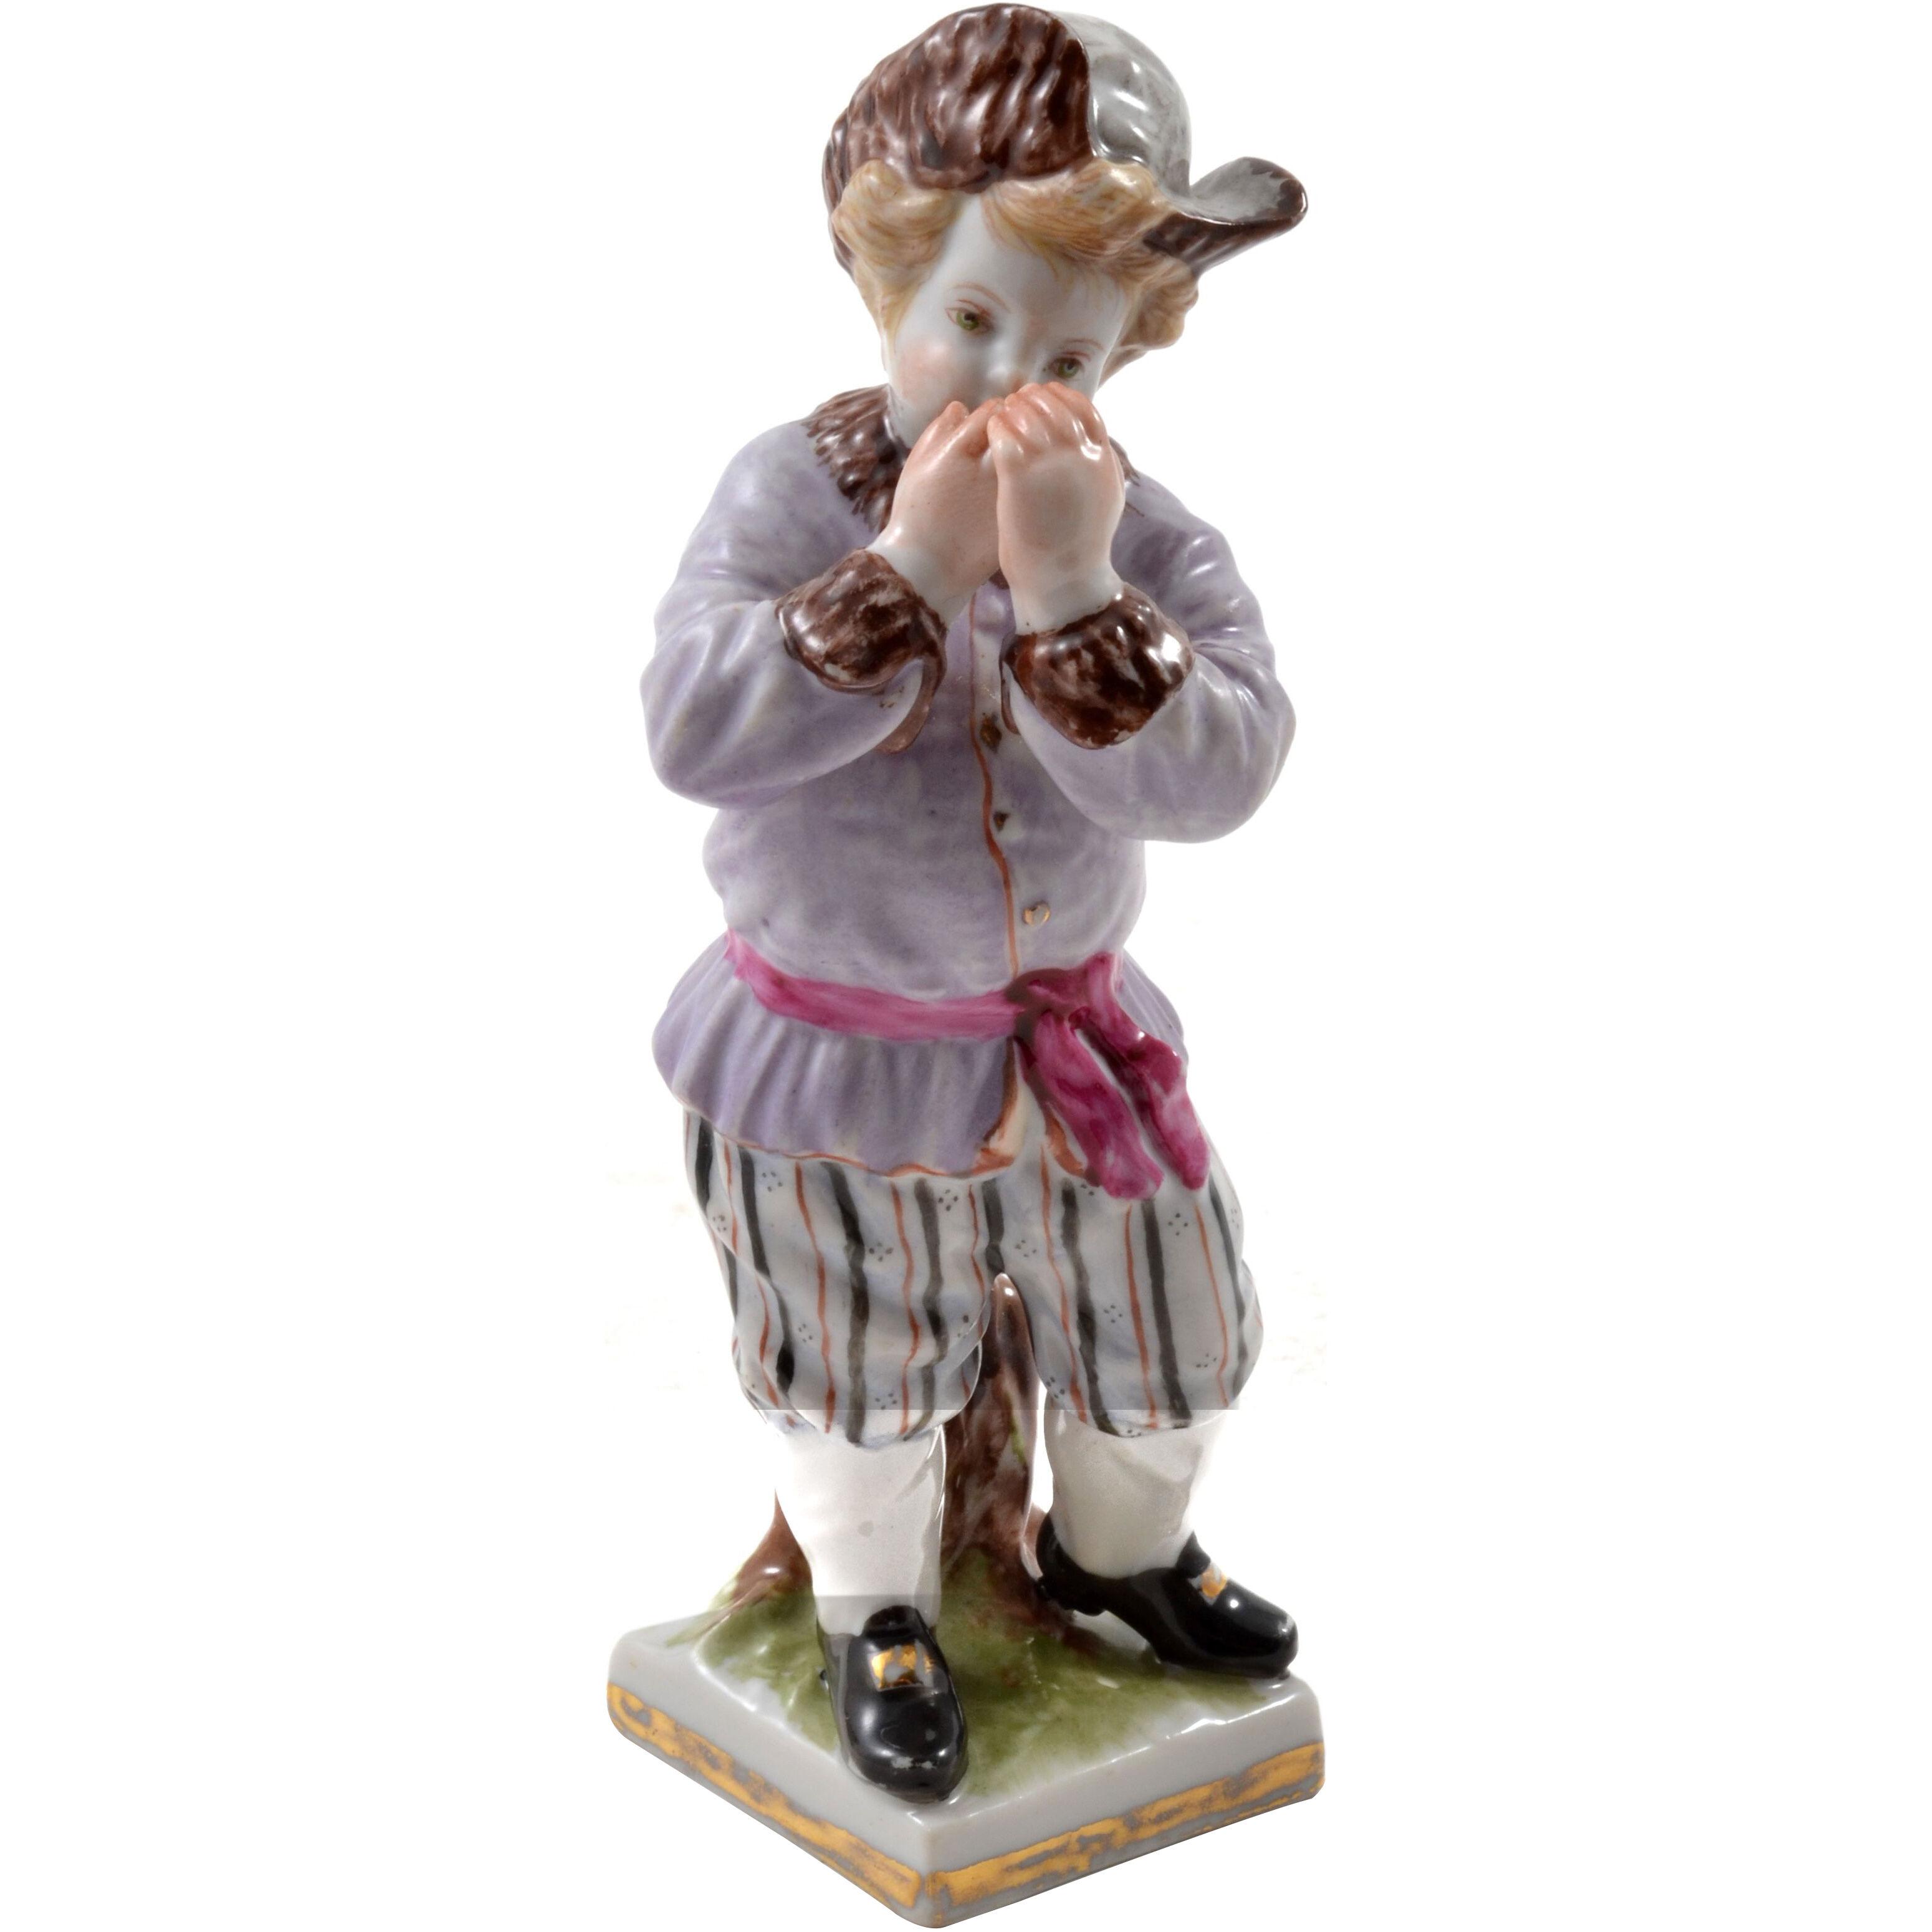 Figurine of a Boy with a Hat. Meissen Hand Painted Porcelain Germany